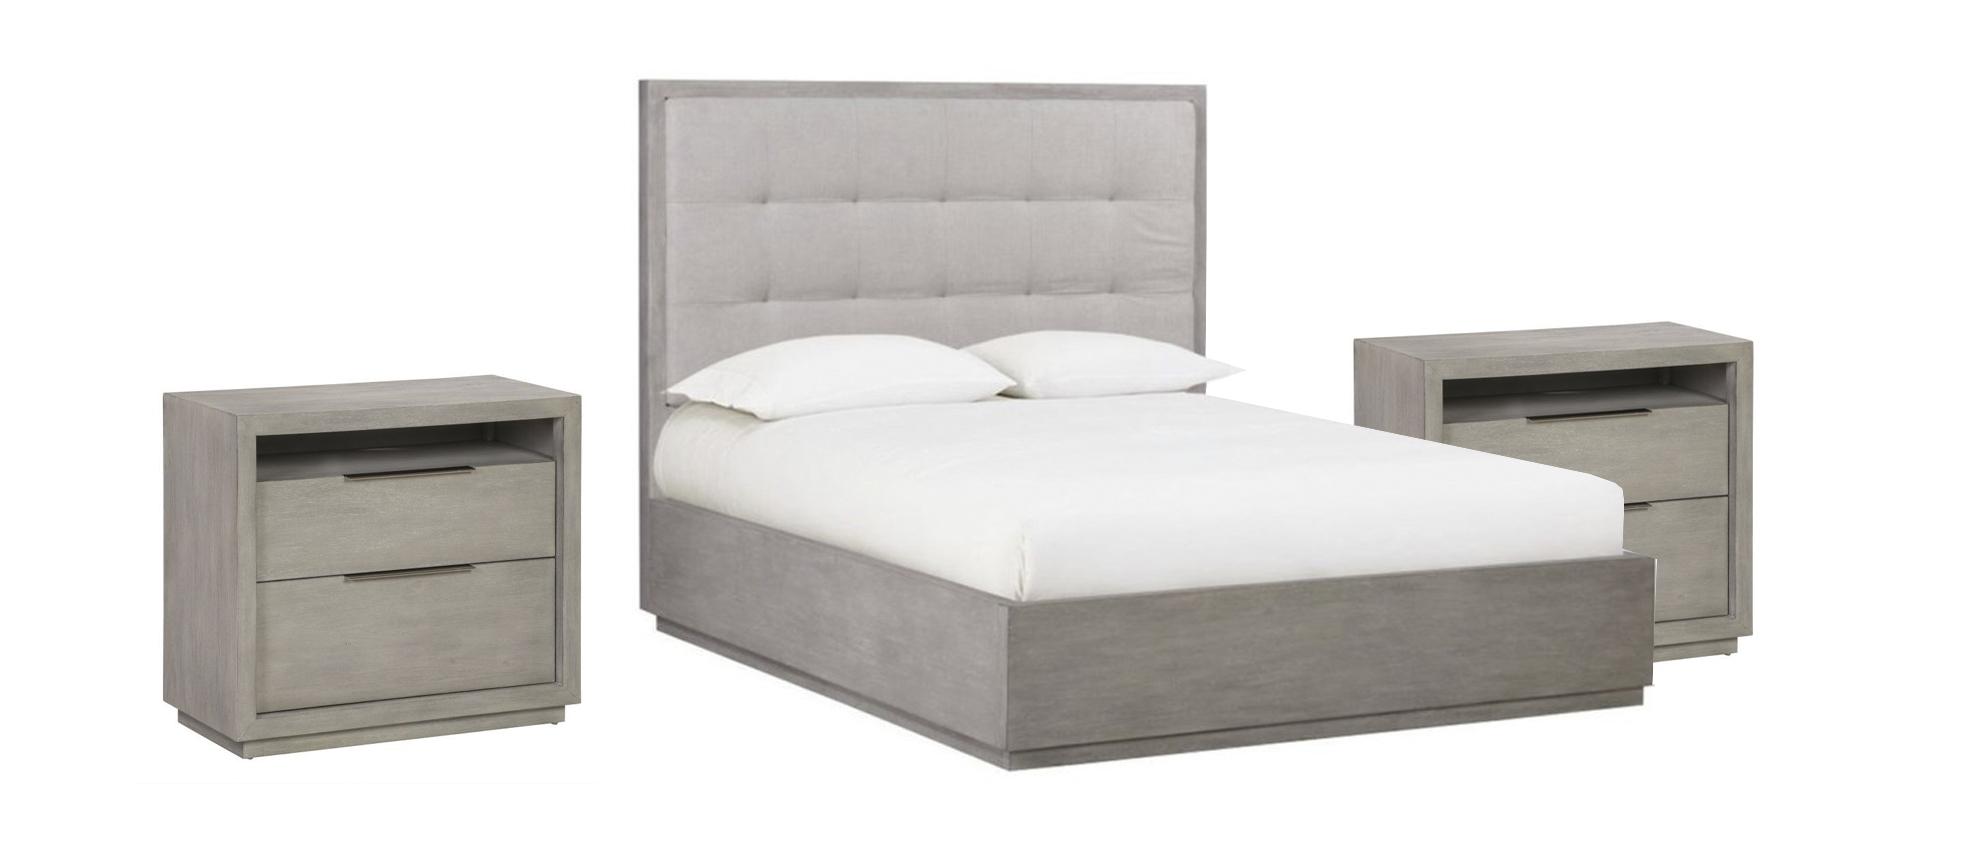 Contemporary Platform Bedroom Set OXFORD AZBXF5-2N-3PC in Light Gray, Stone Fabric